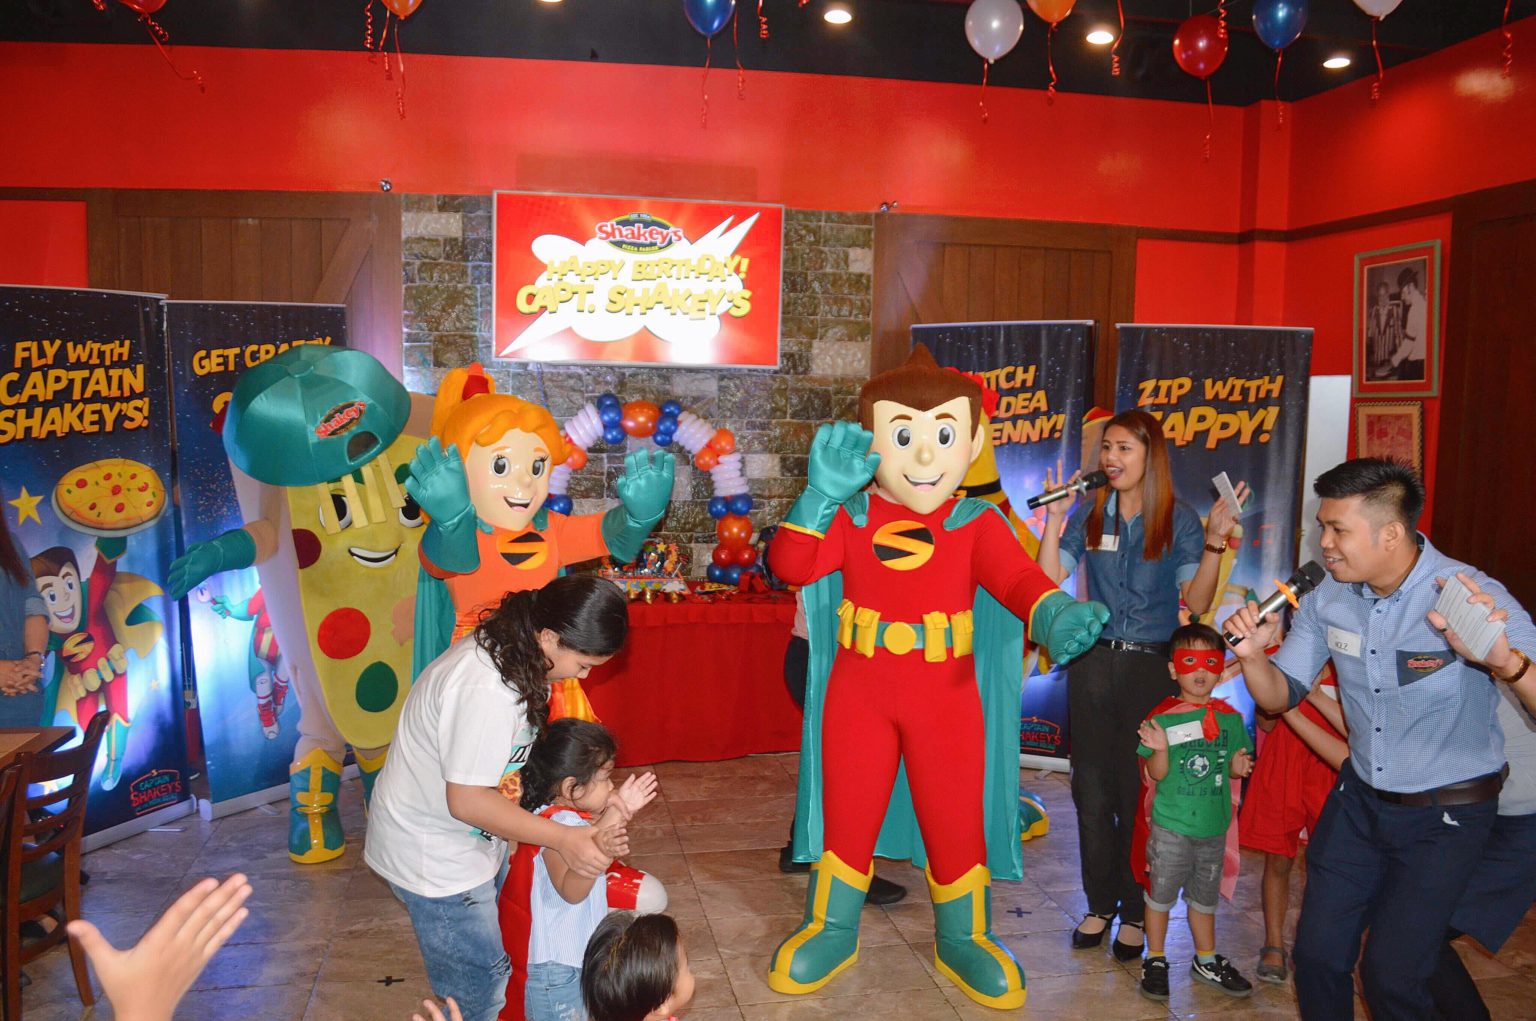 Budgetfriendly Kiddie Party at Shakey's Tipid Mommy